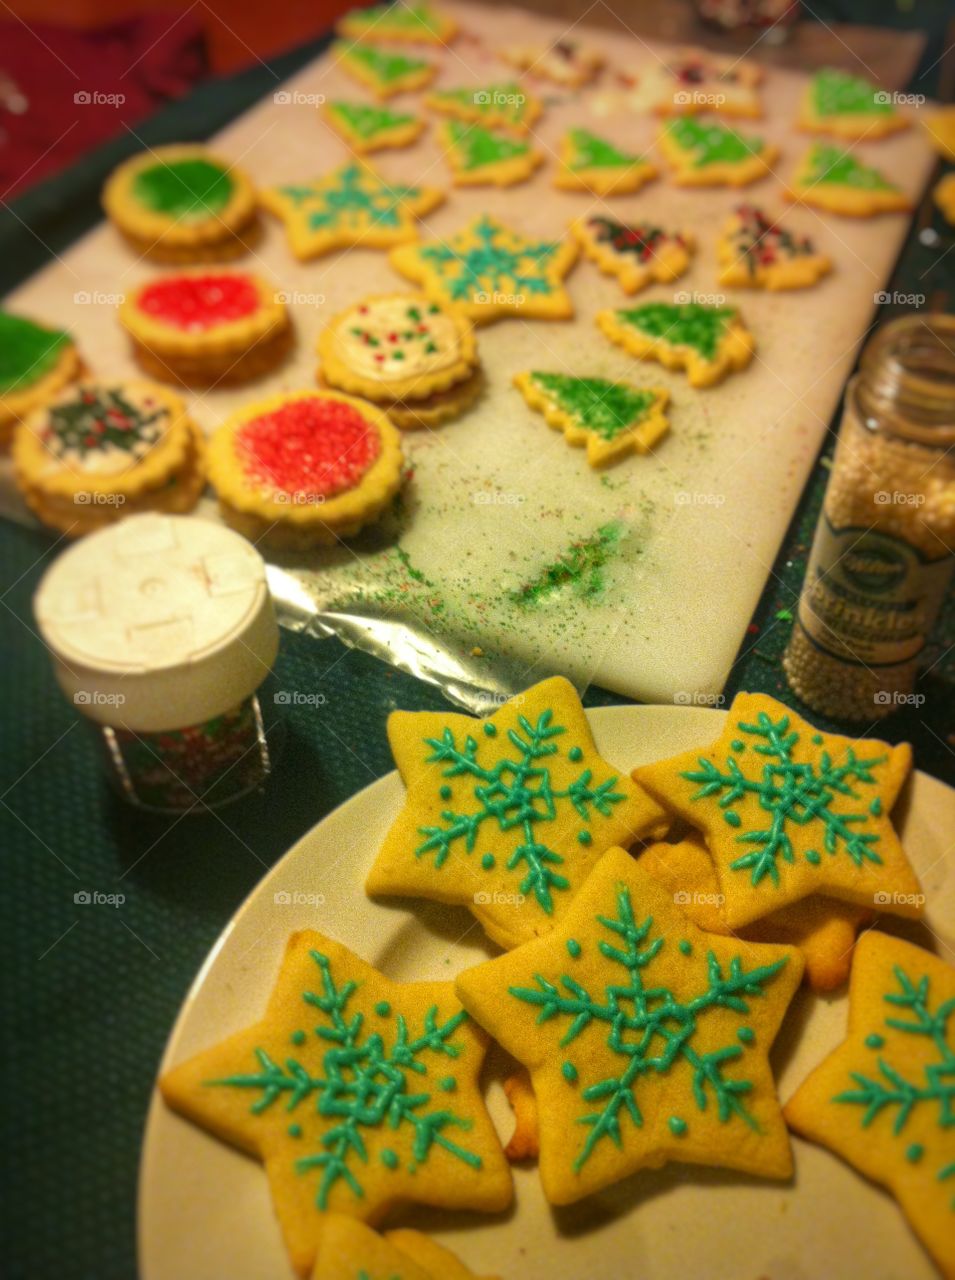 Baking Christmas cookies. After my kids and I baked sugar cookies!